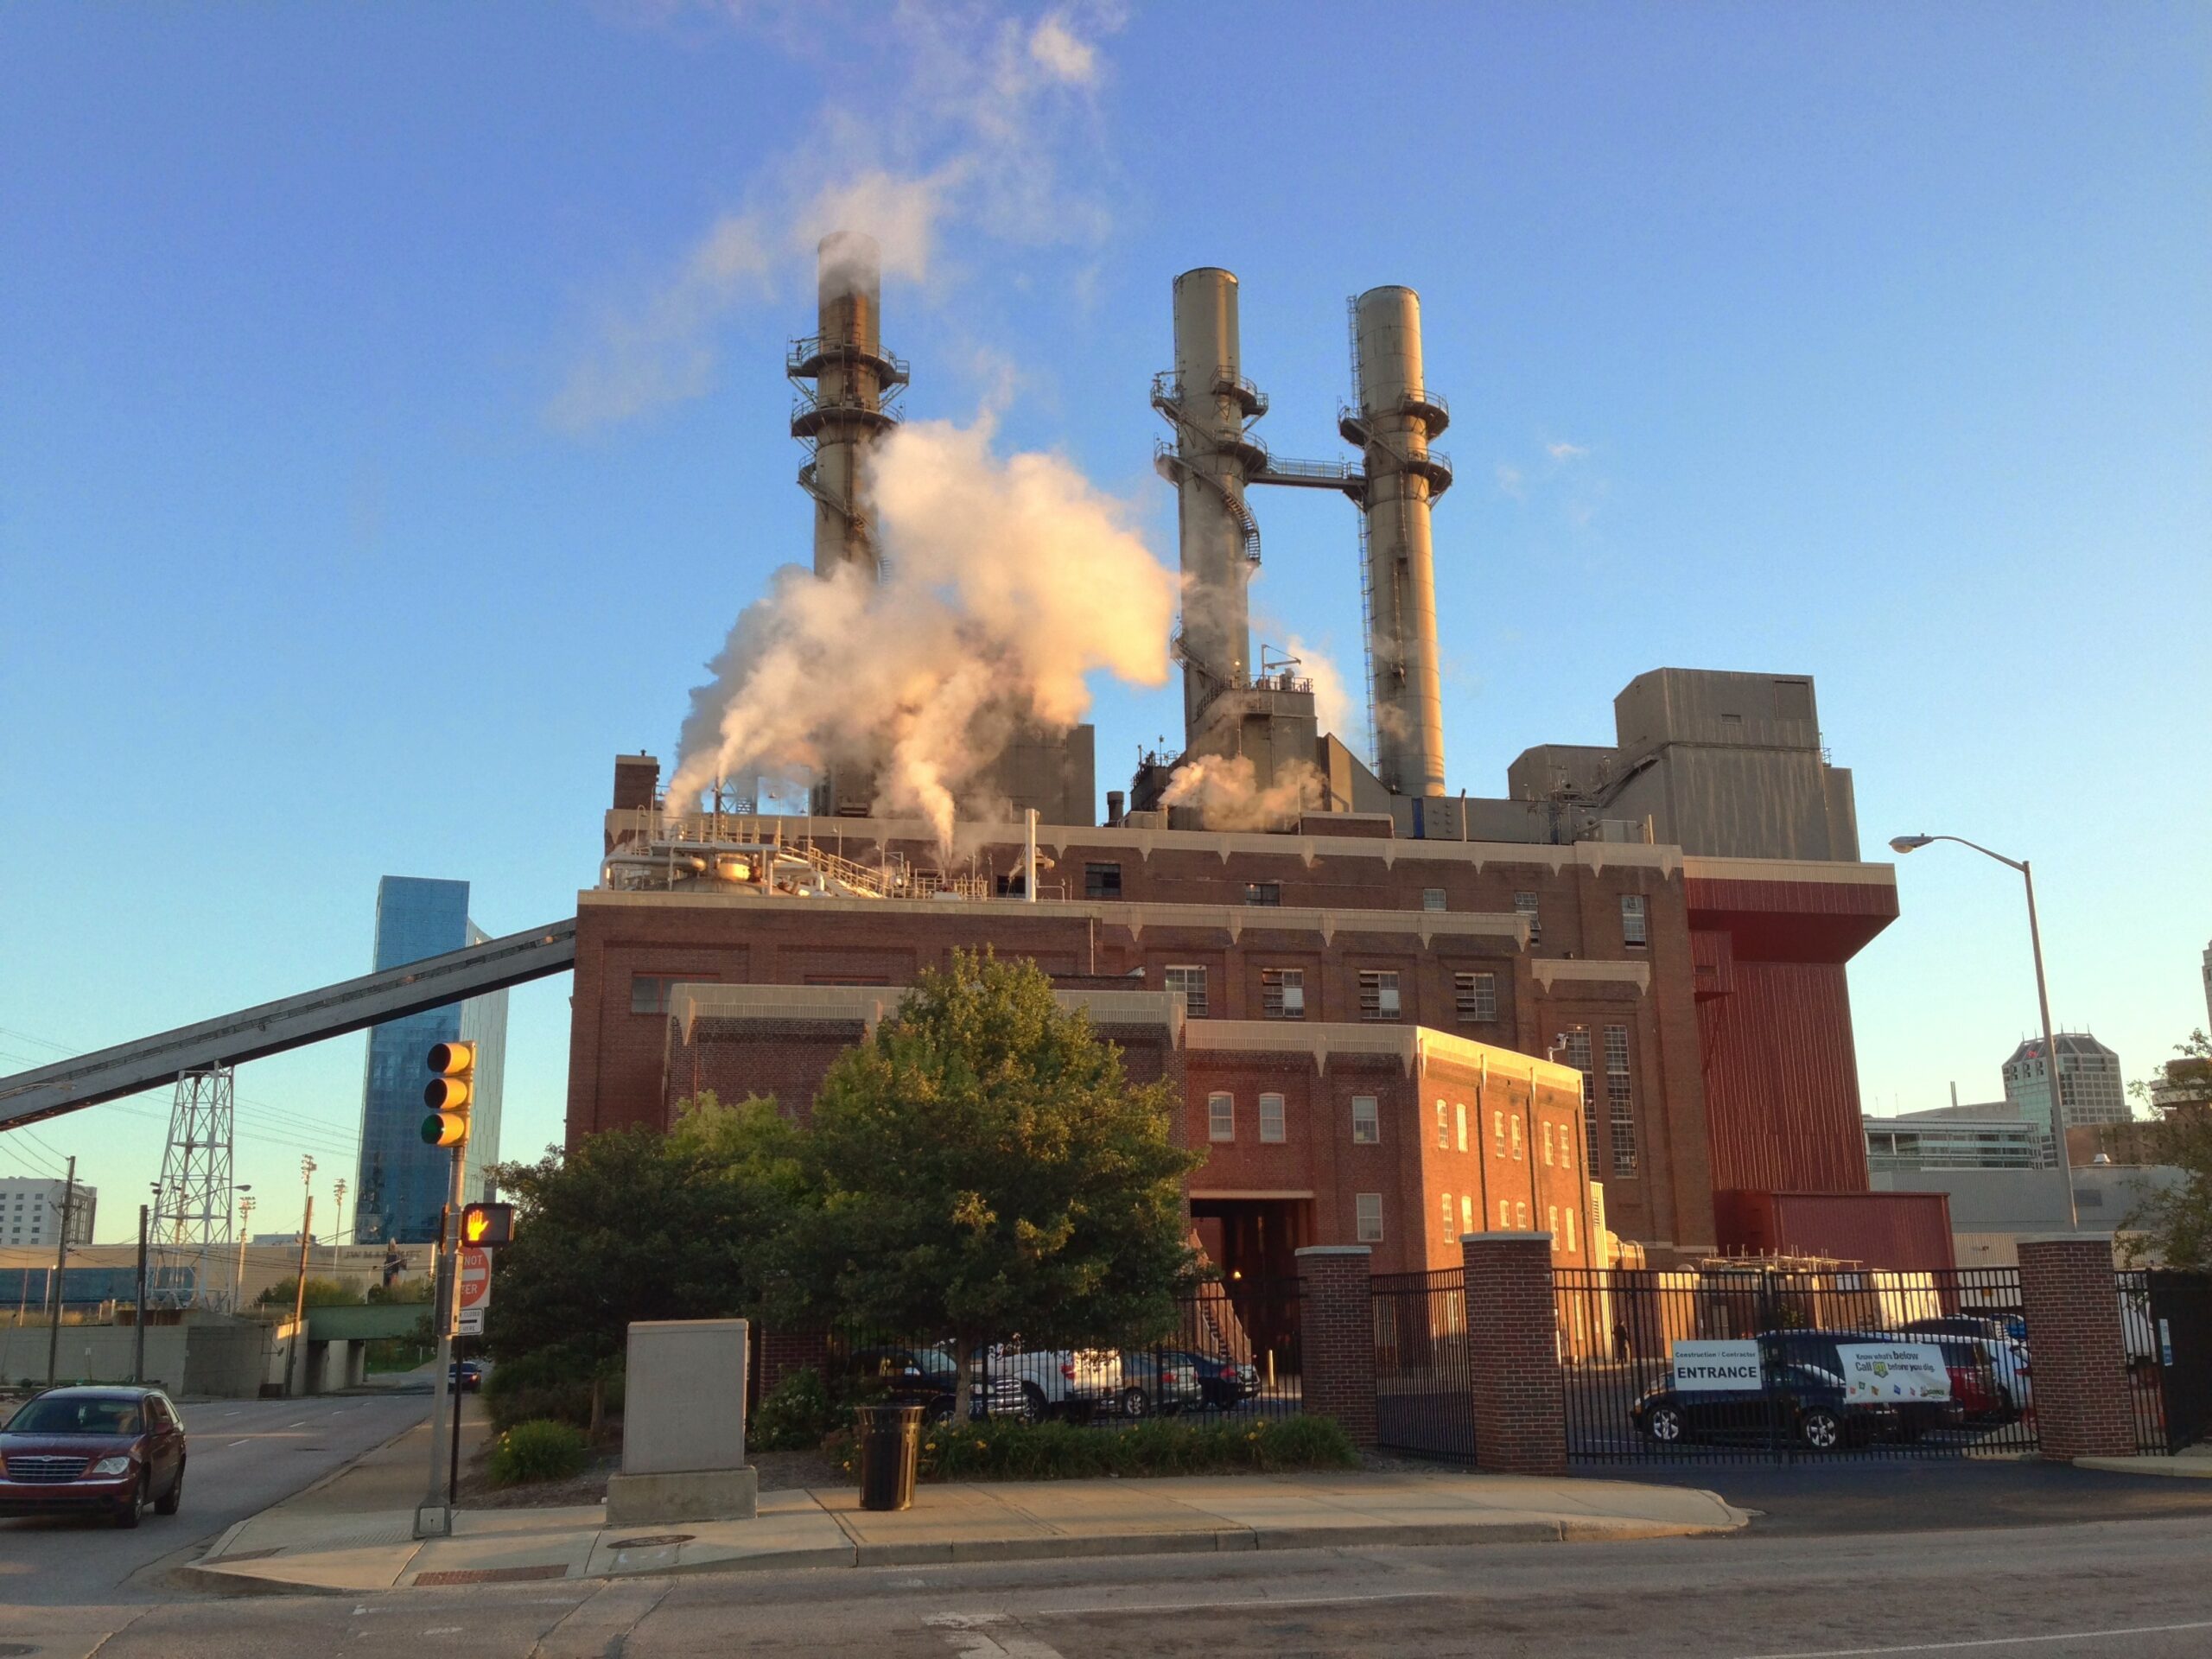 The building is a large, brick, industrial structure with three smokestacks on the roof.